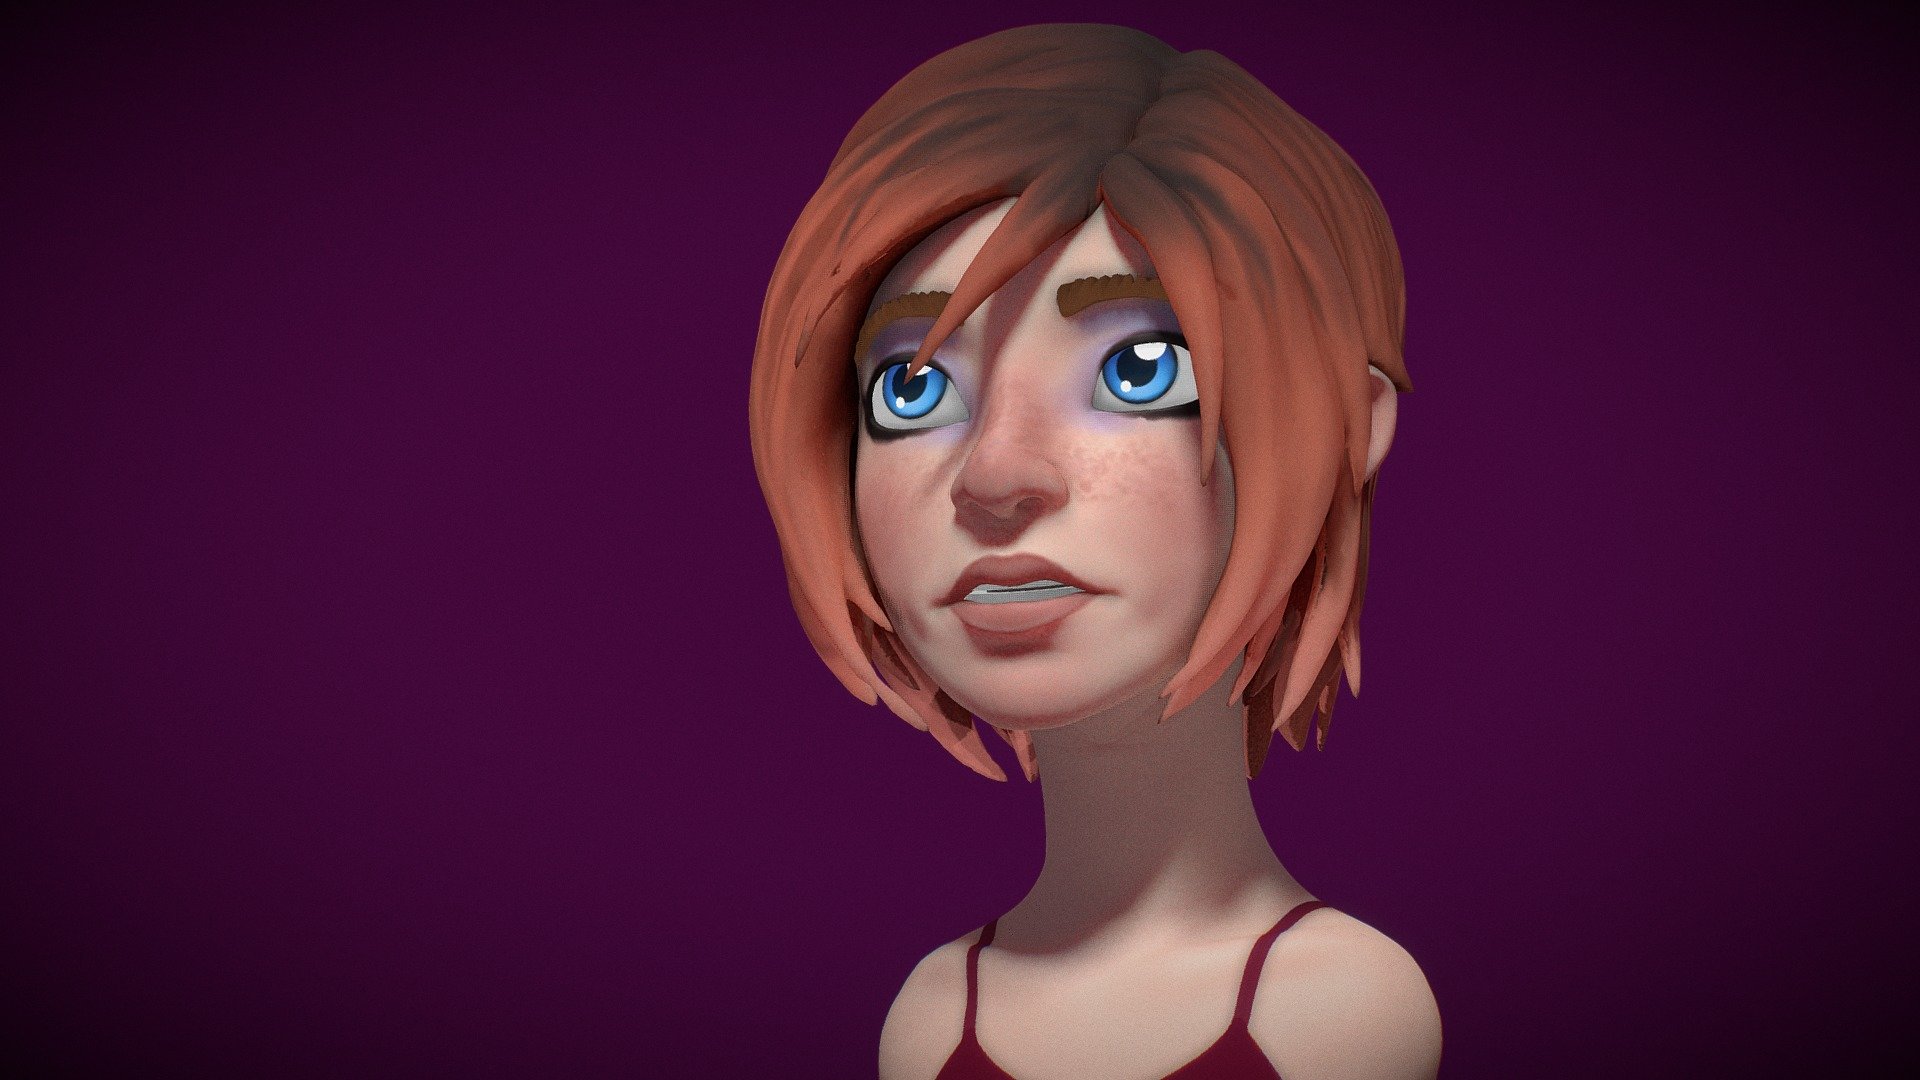 Sculpt done for fun :)

For more: https://www.artstation.com/artwork/YyXZX

https://www.artstation.com/jplacerda - Cartoon Girl bust - Download Free 3D model by João Lacerda (@panc0) 3d model